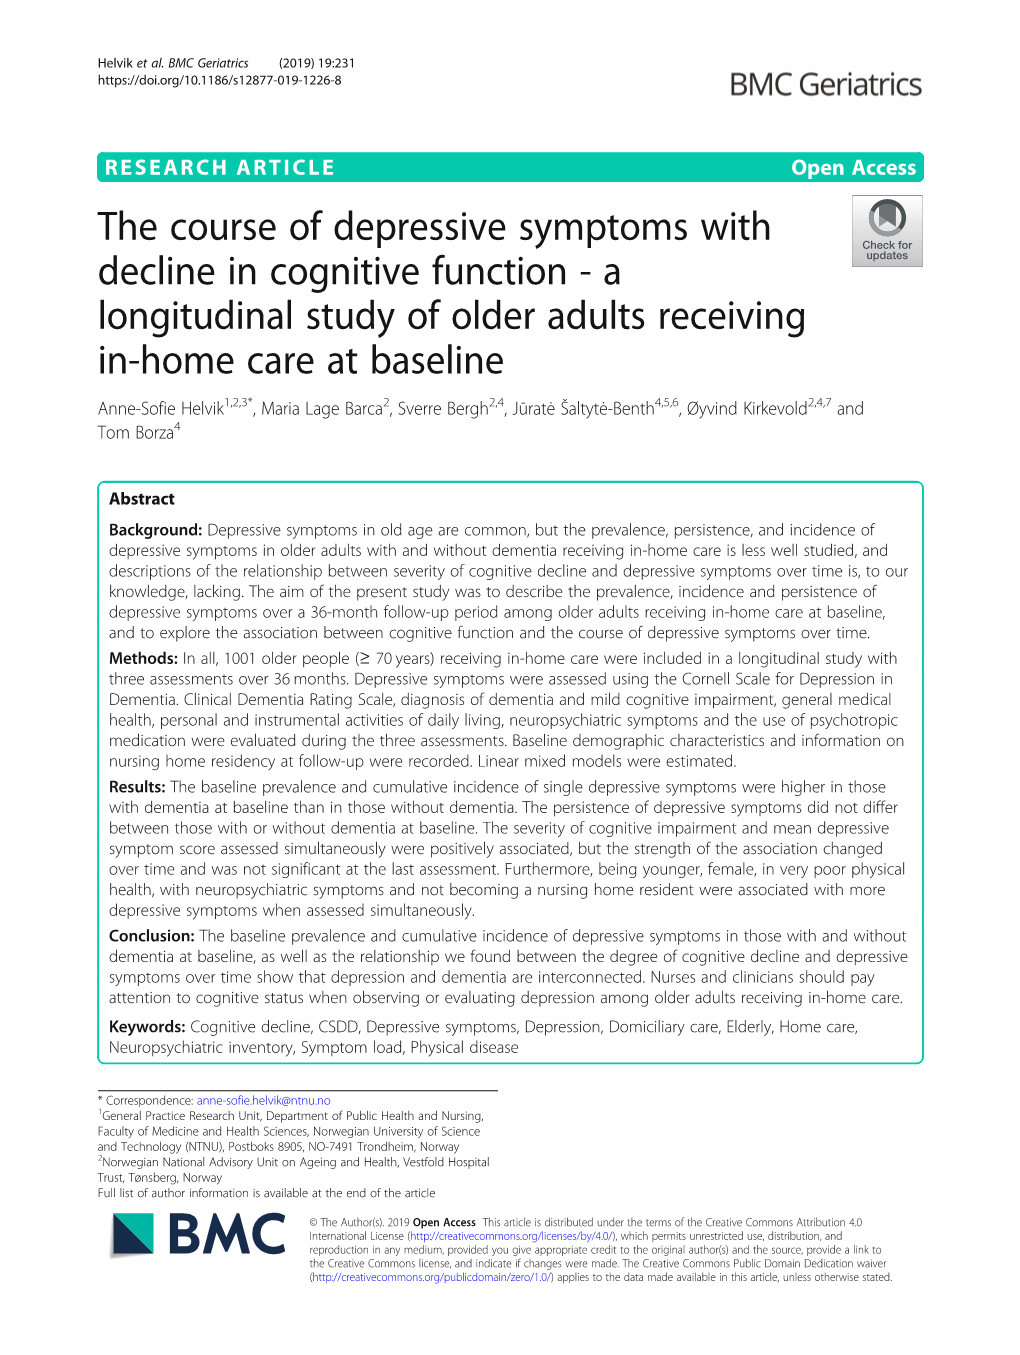 The Course of Depressive Symptoms with Decline In